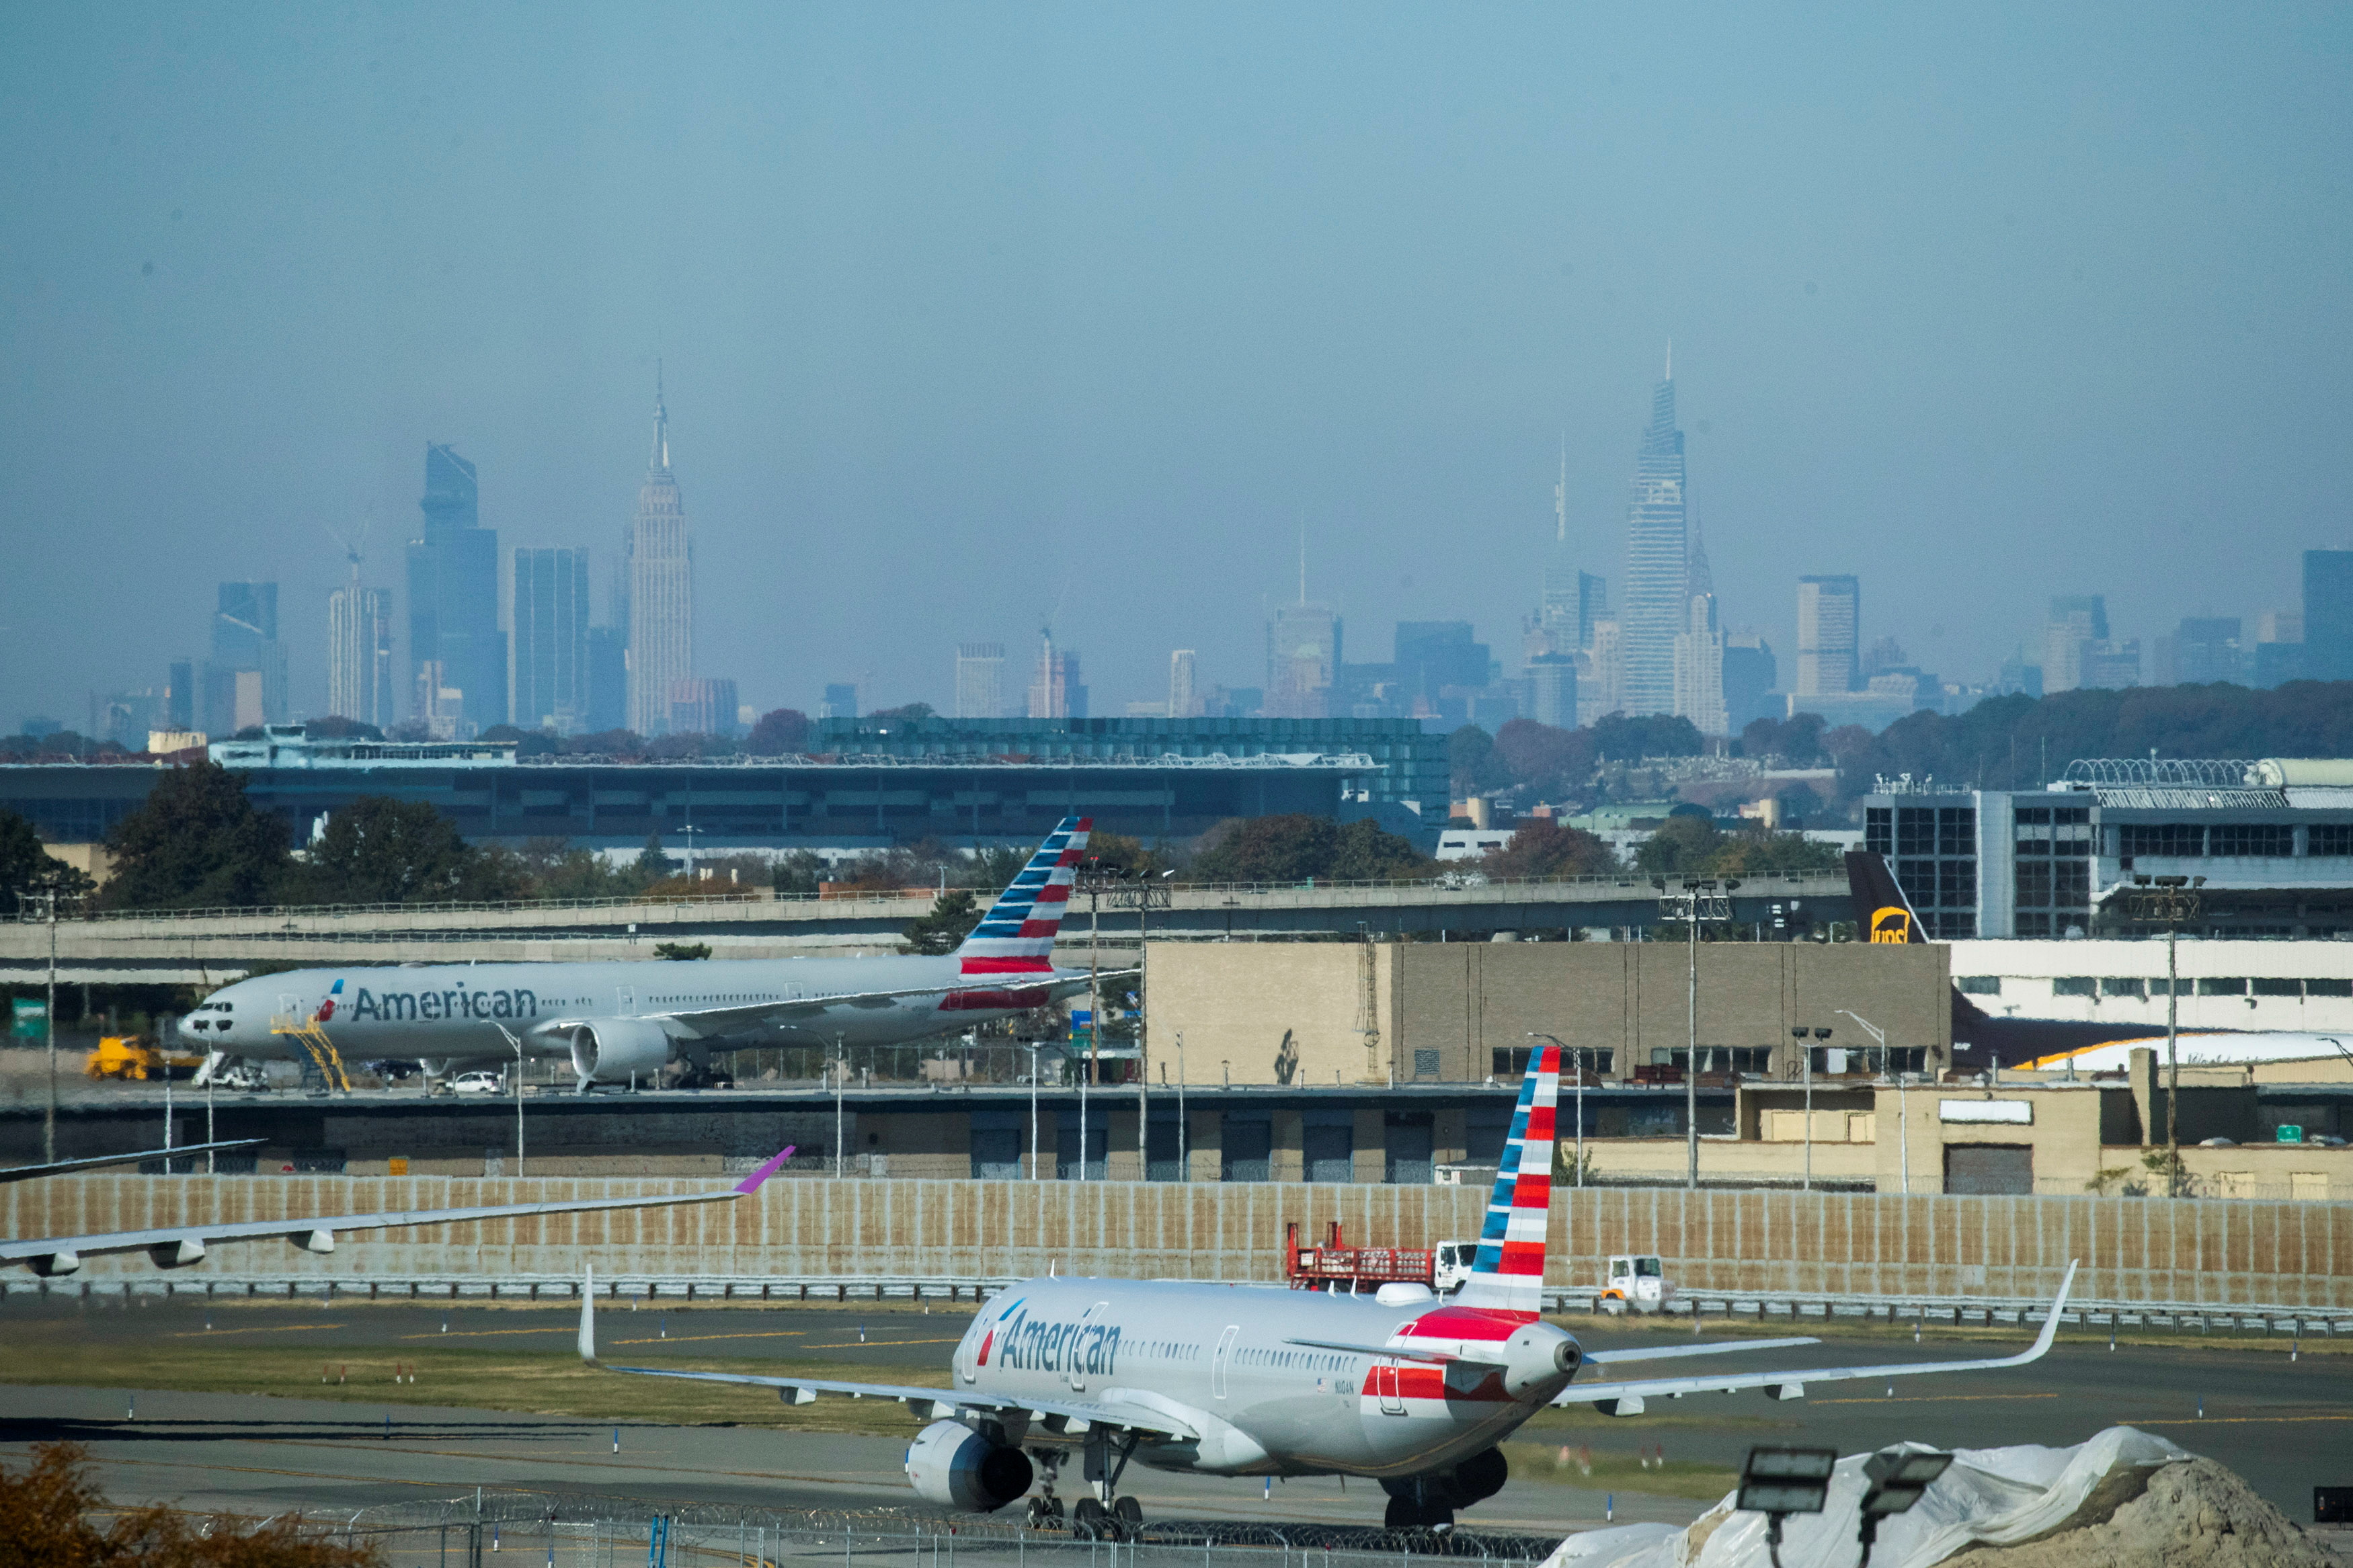 American Airlines planes taxi on the tarmac as the skyline of New York City is seen in the background from the JFK International Airport in New York, U.S.,  November 8, 2021. REUTERS/Eduardo Munoz/File Photo